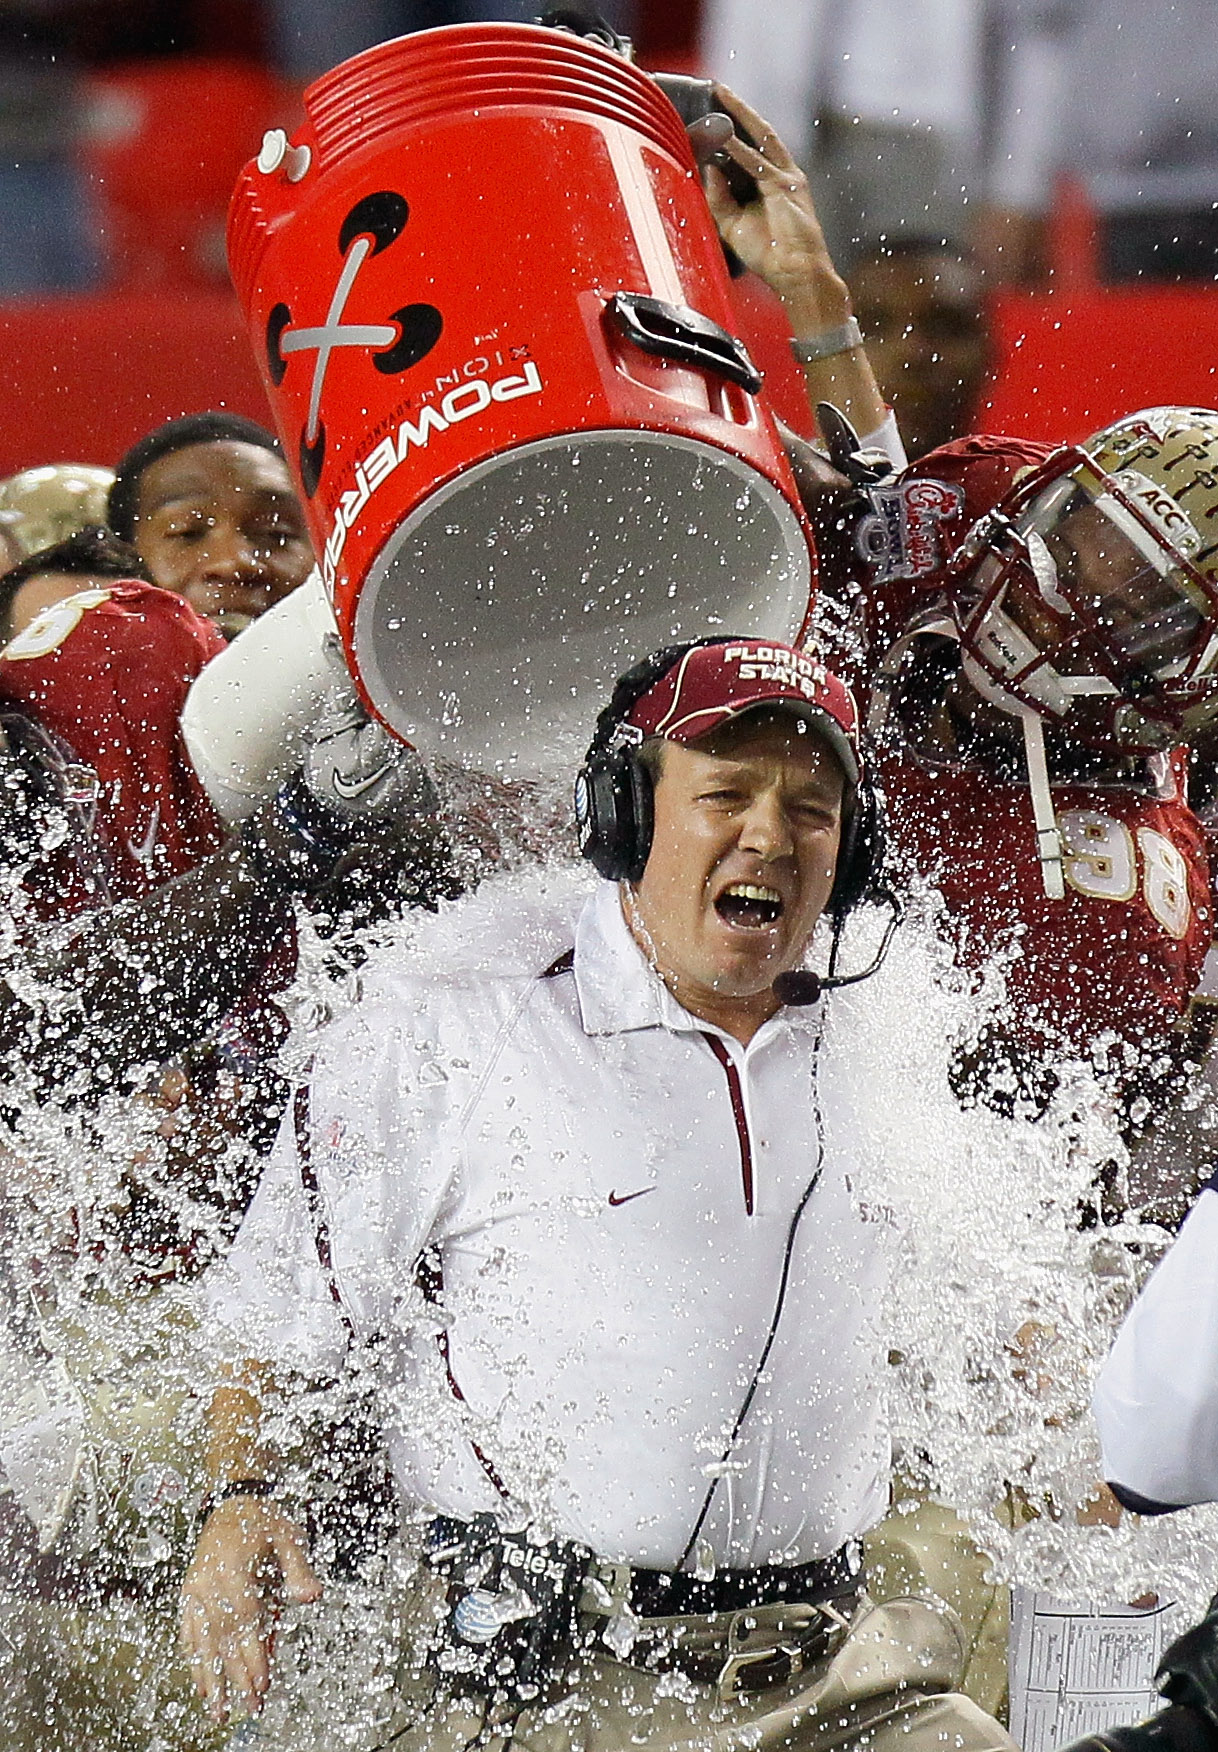 ATLANTA, GA - DECEMBER 31:  Head coach JimboFisher of the Florida State Seminoles is doused with water in the final seconds of their 26-17 win over the South Carolina Gamecocks during the 2010 Chick-fil-A Bowl at Georgia Dome on December 31, 2010 in Atlan